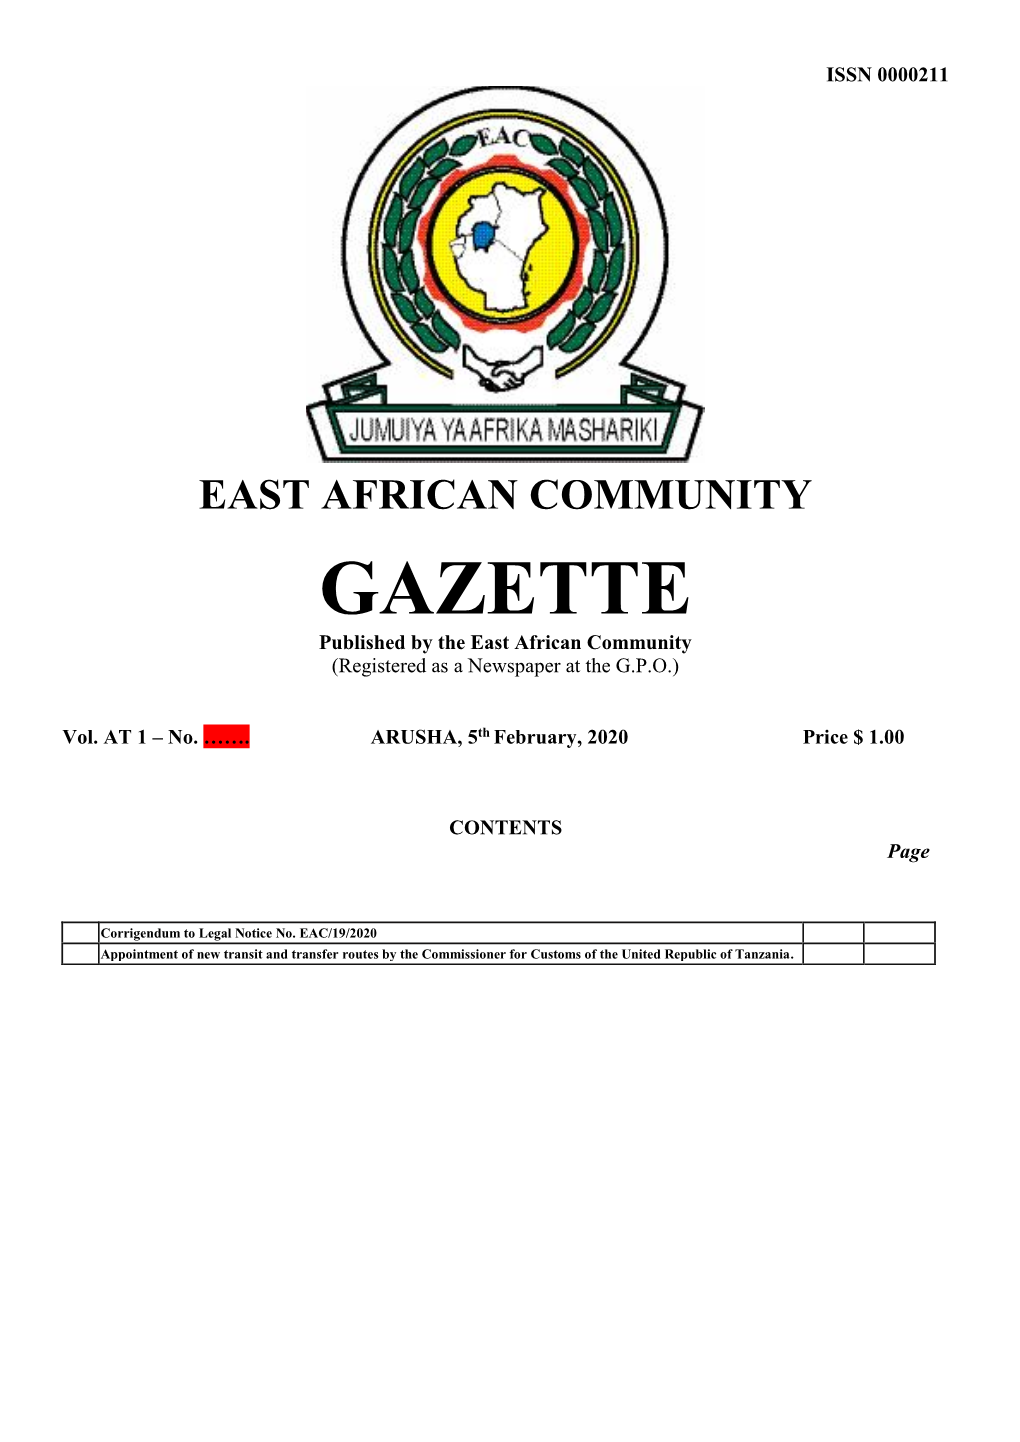 GAZETTE Published by the East African Community (Registered As a Newspaper at the G.P.O.)